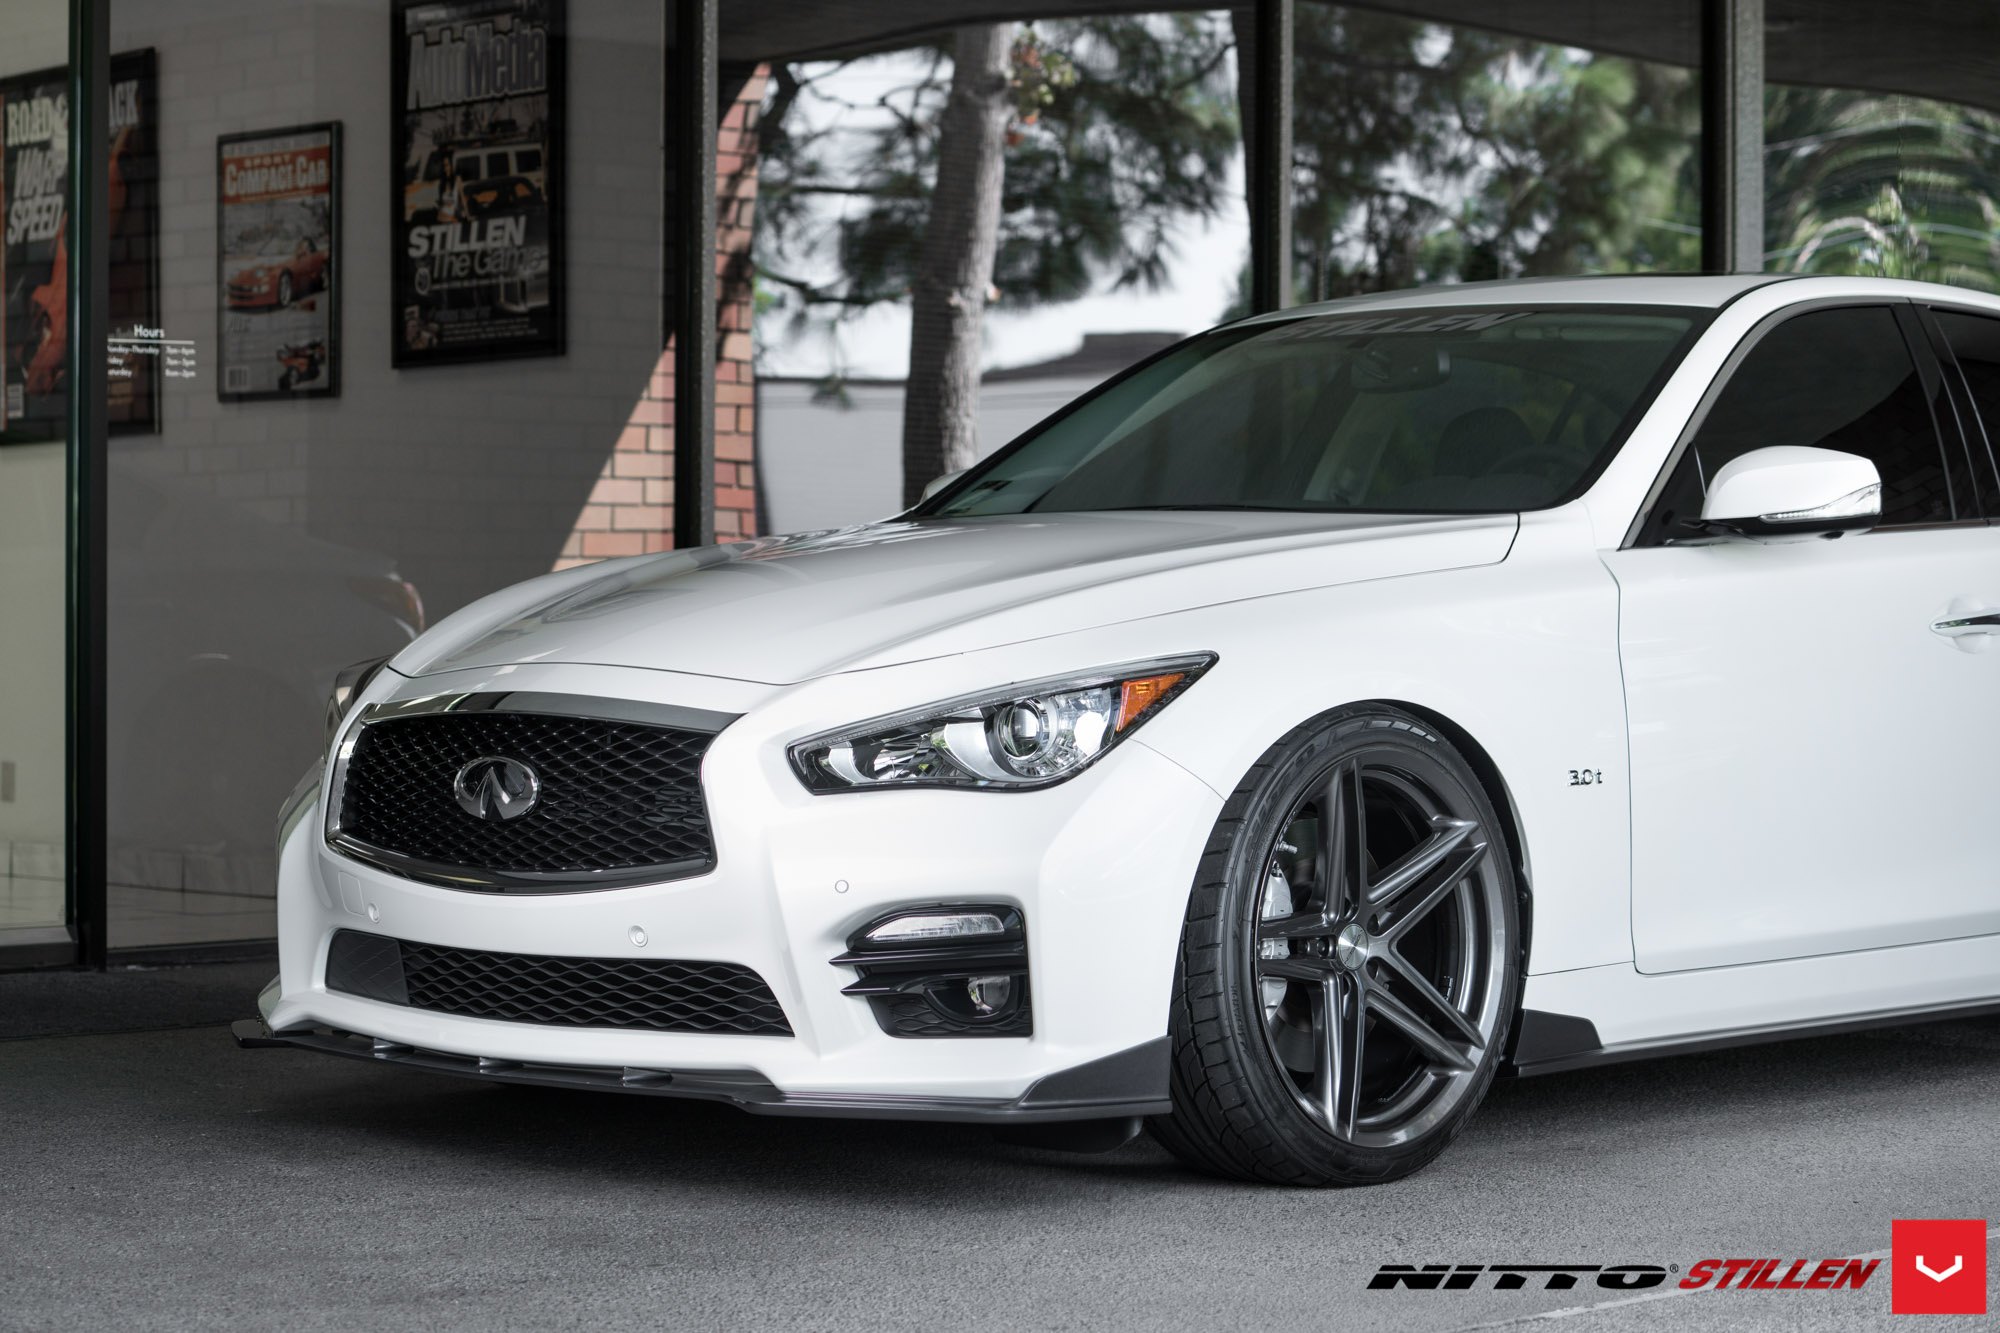 Infiniti Q50 3.0T with Aftermarket Front Bumper Cover - Photo by Vossen